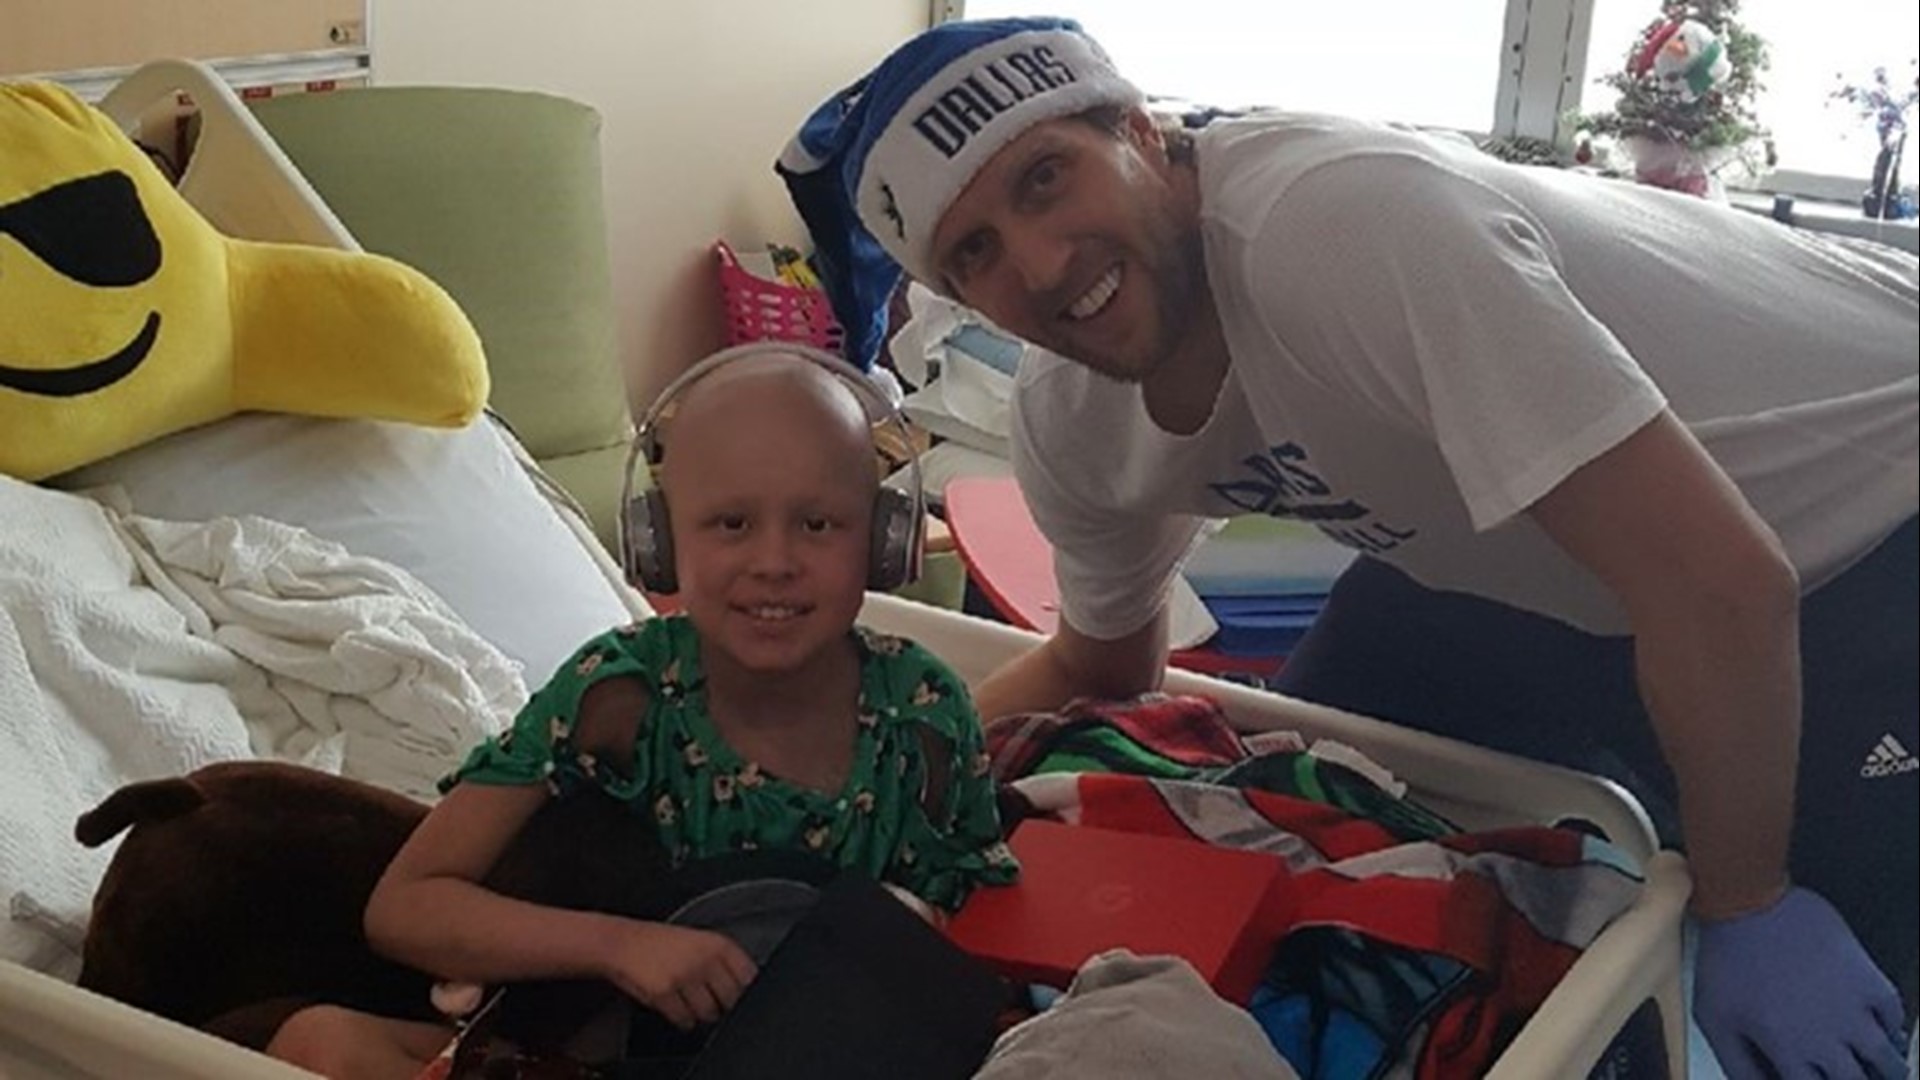 Dirk Nowitzki has quietly visited patients at Children’s Medical Center in Dallas, but never allowed those visits to be publicized.